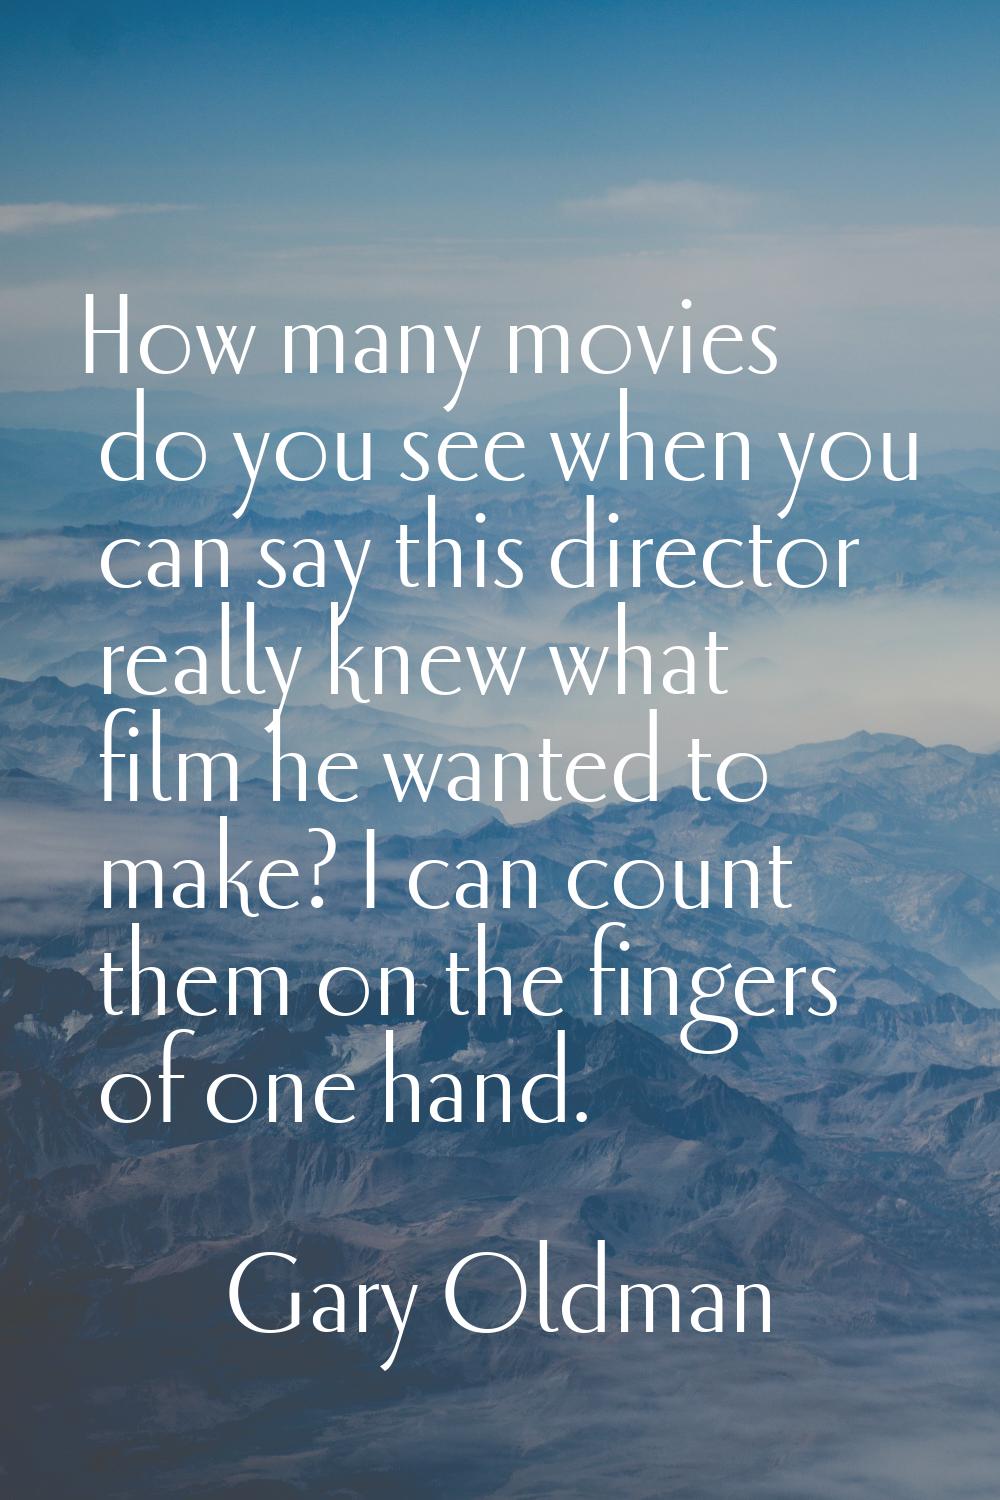 How many movies do you see when you can say this director really knew what film he wanted to make? 